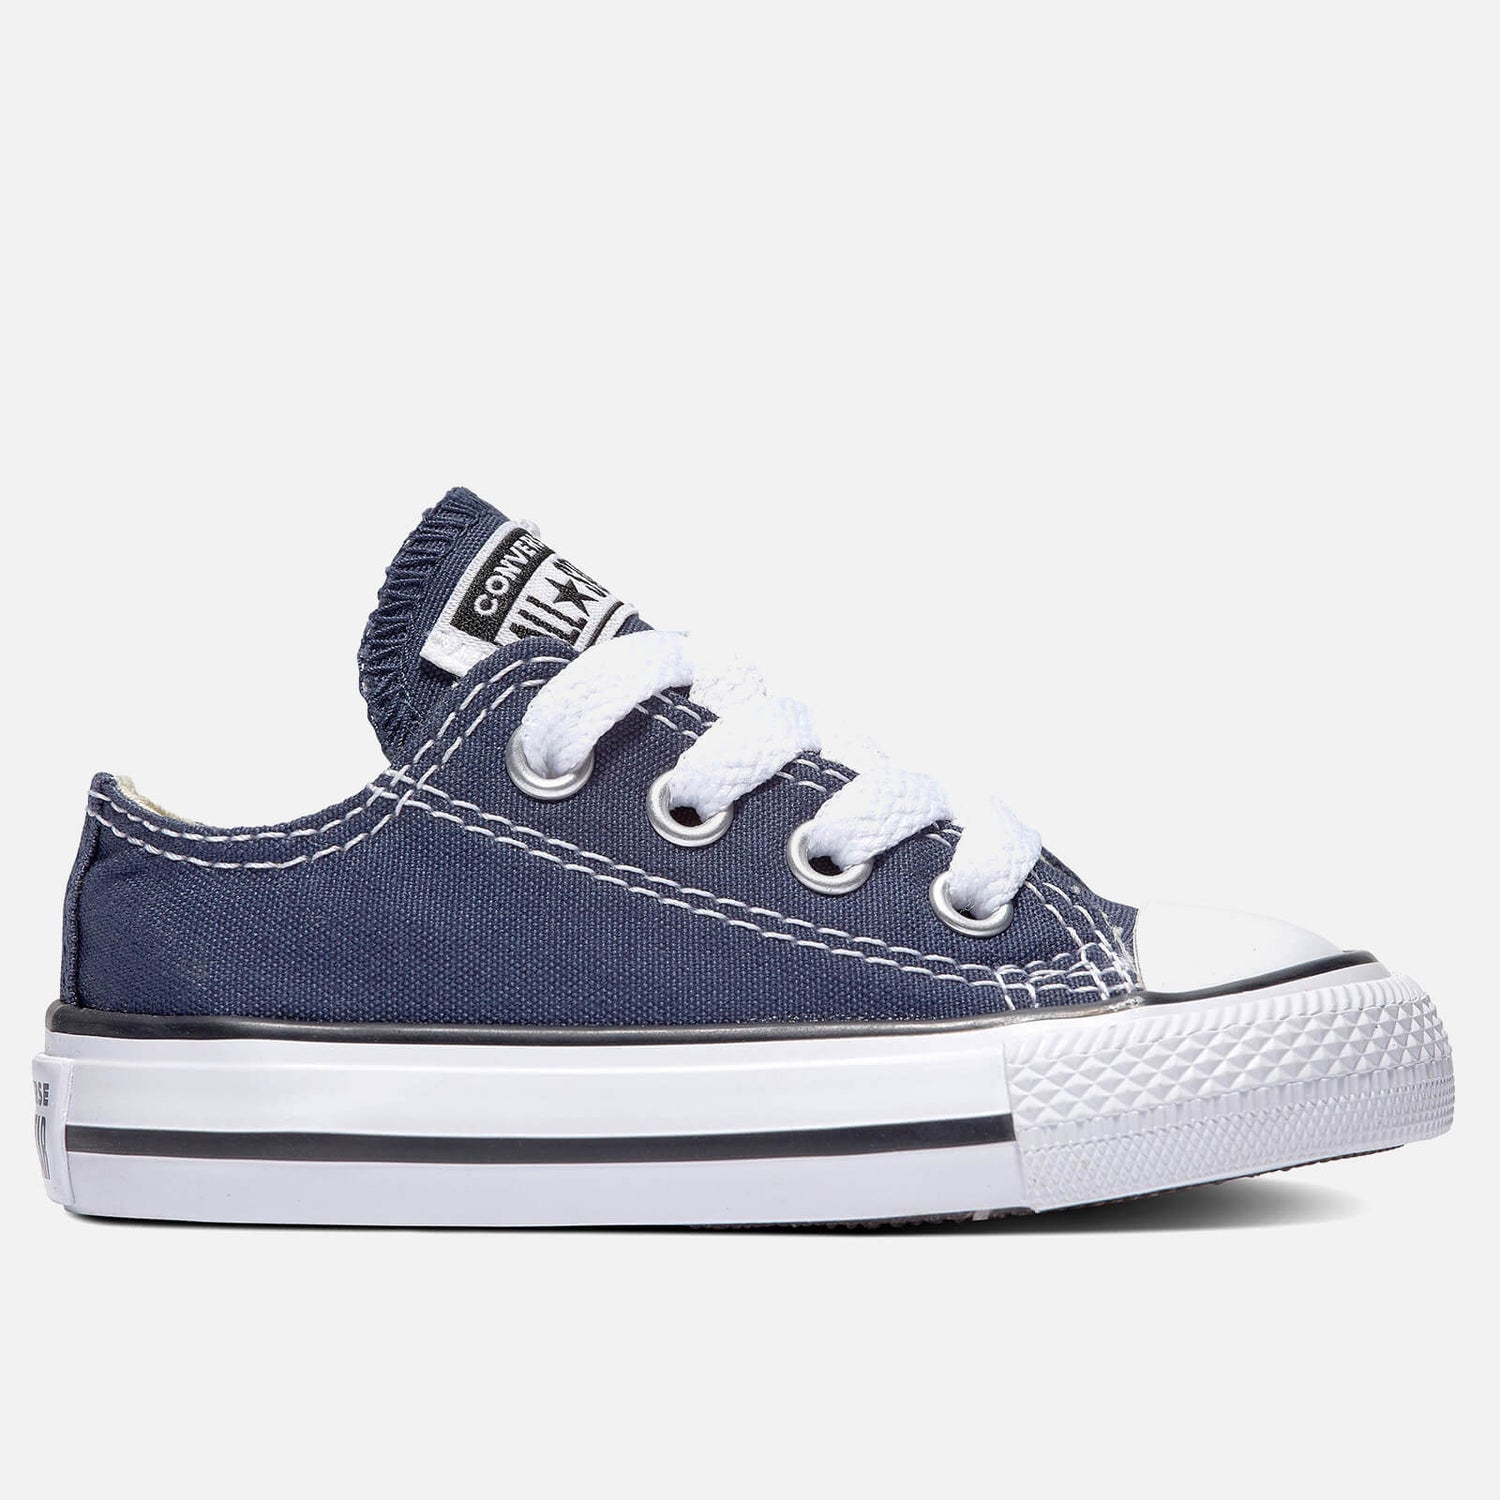 Converse Toddlers' Chuck Taylor All Star Ox Trainers - Navy - UK 5 Toddler